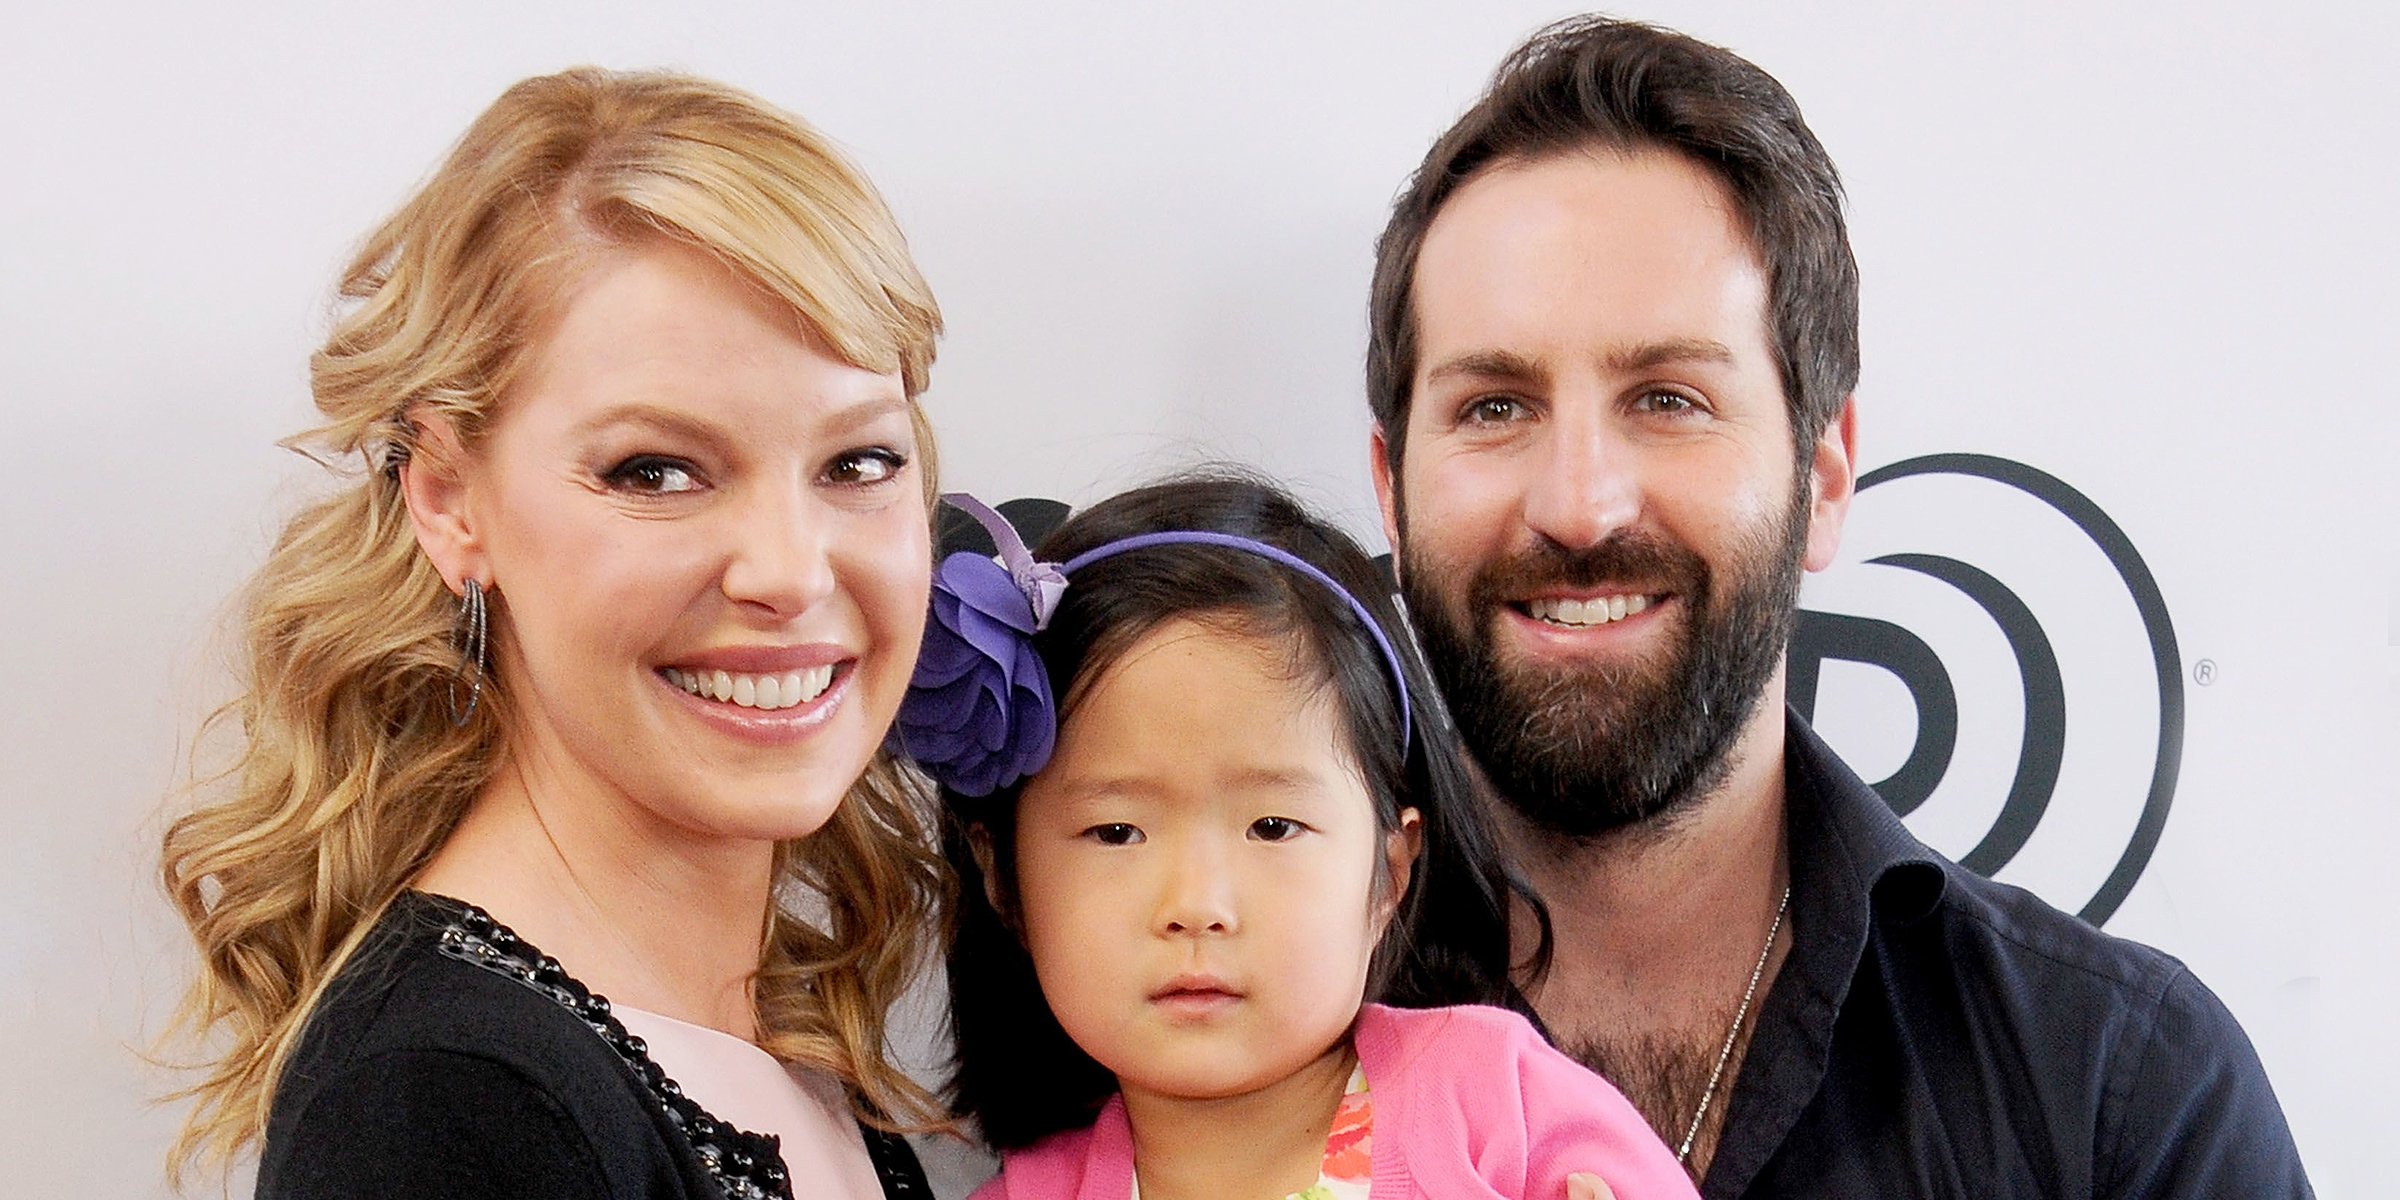 Katherine Heigl, Nancy Leigh and Josh Kelley | Source: Getty Images